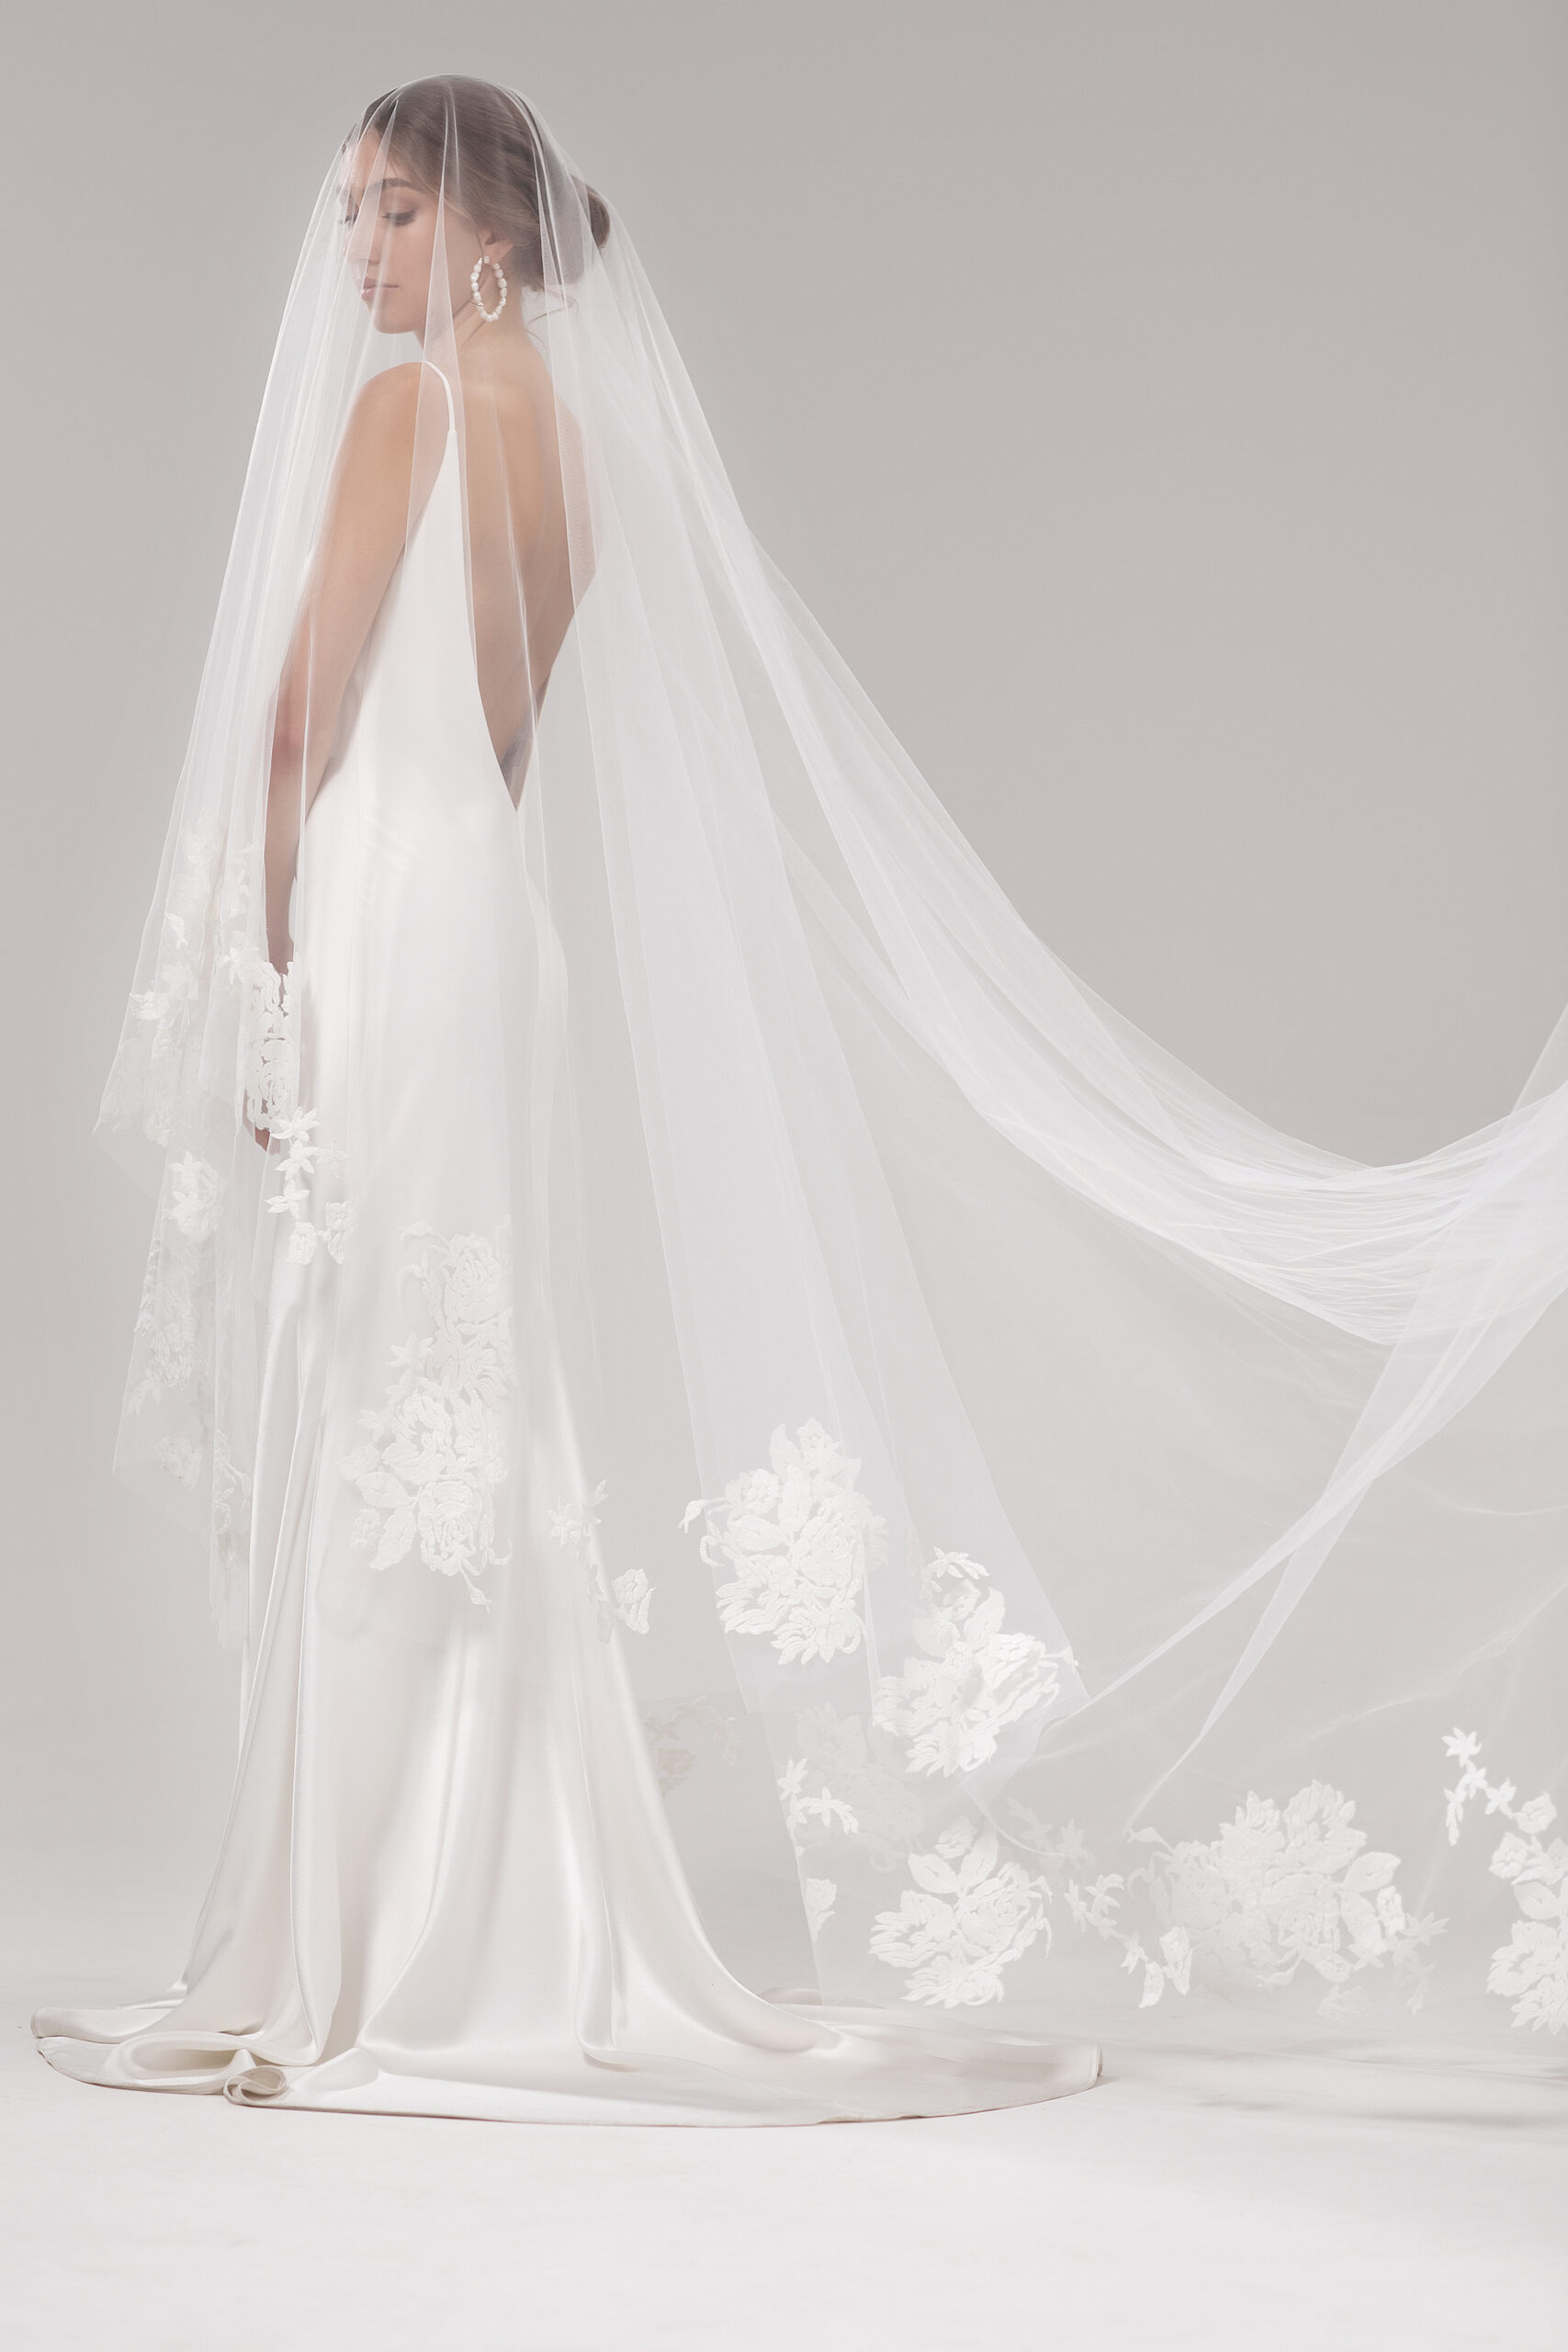 Side view of model wearing the Mayfair veil blusher style over the face. Mayfair is a two-tier 2.5m veil with delicate floral embroidery around the edge.